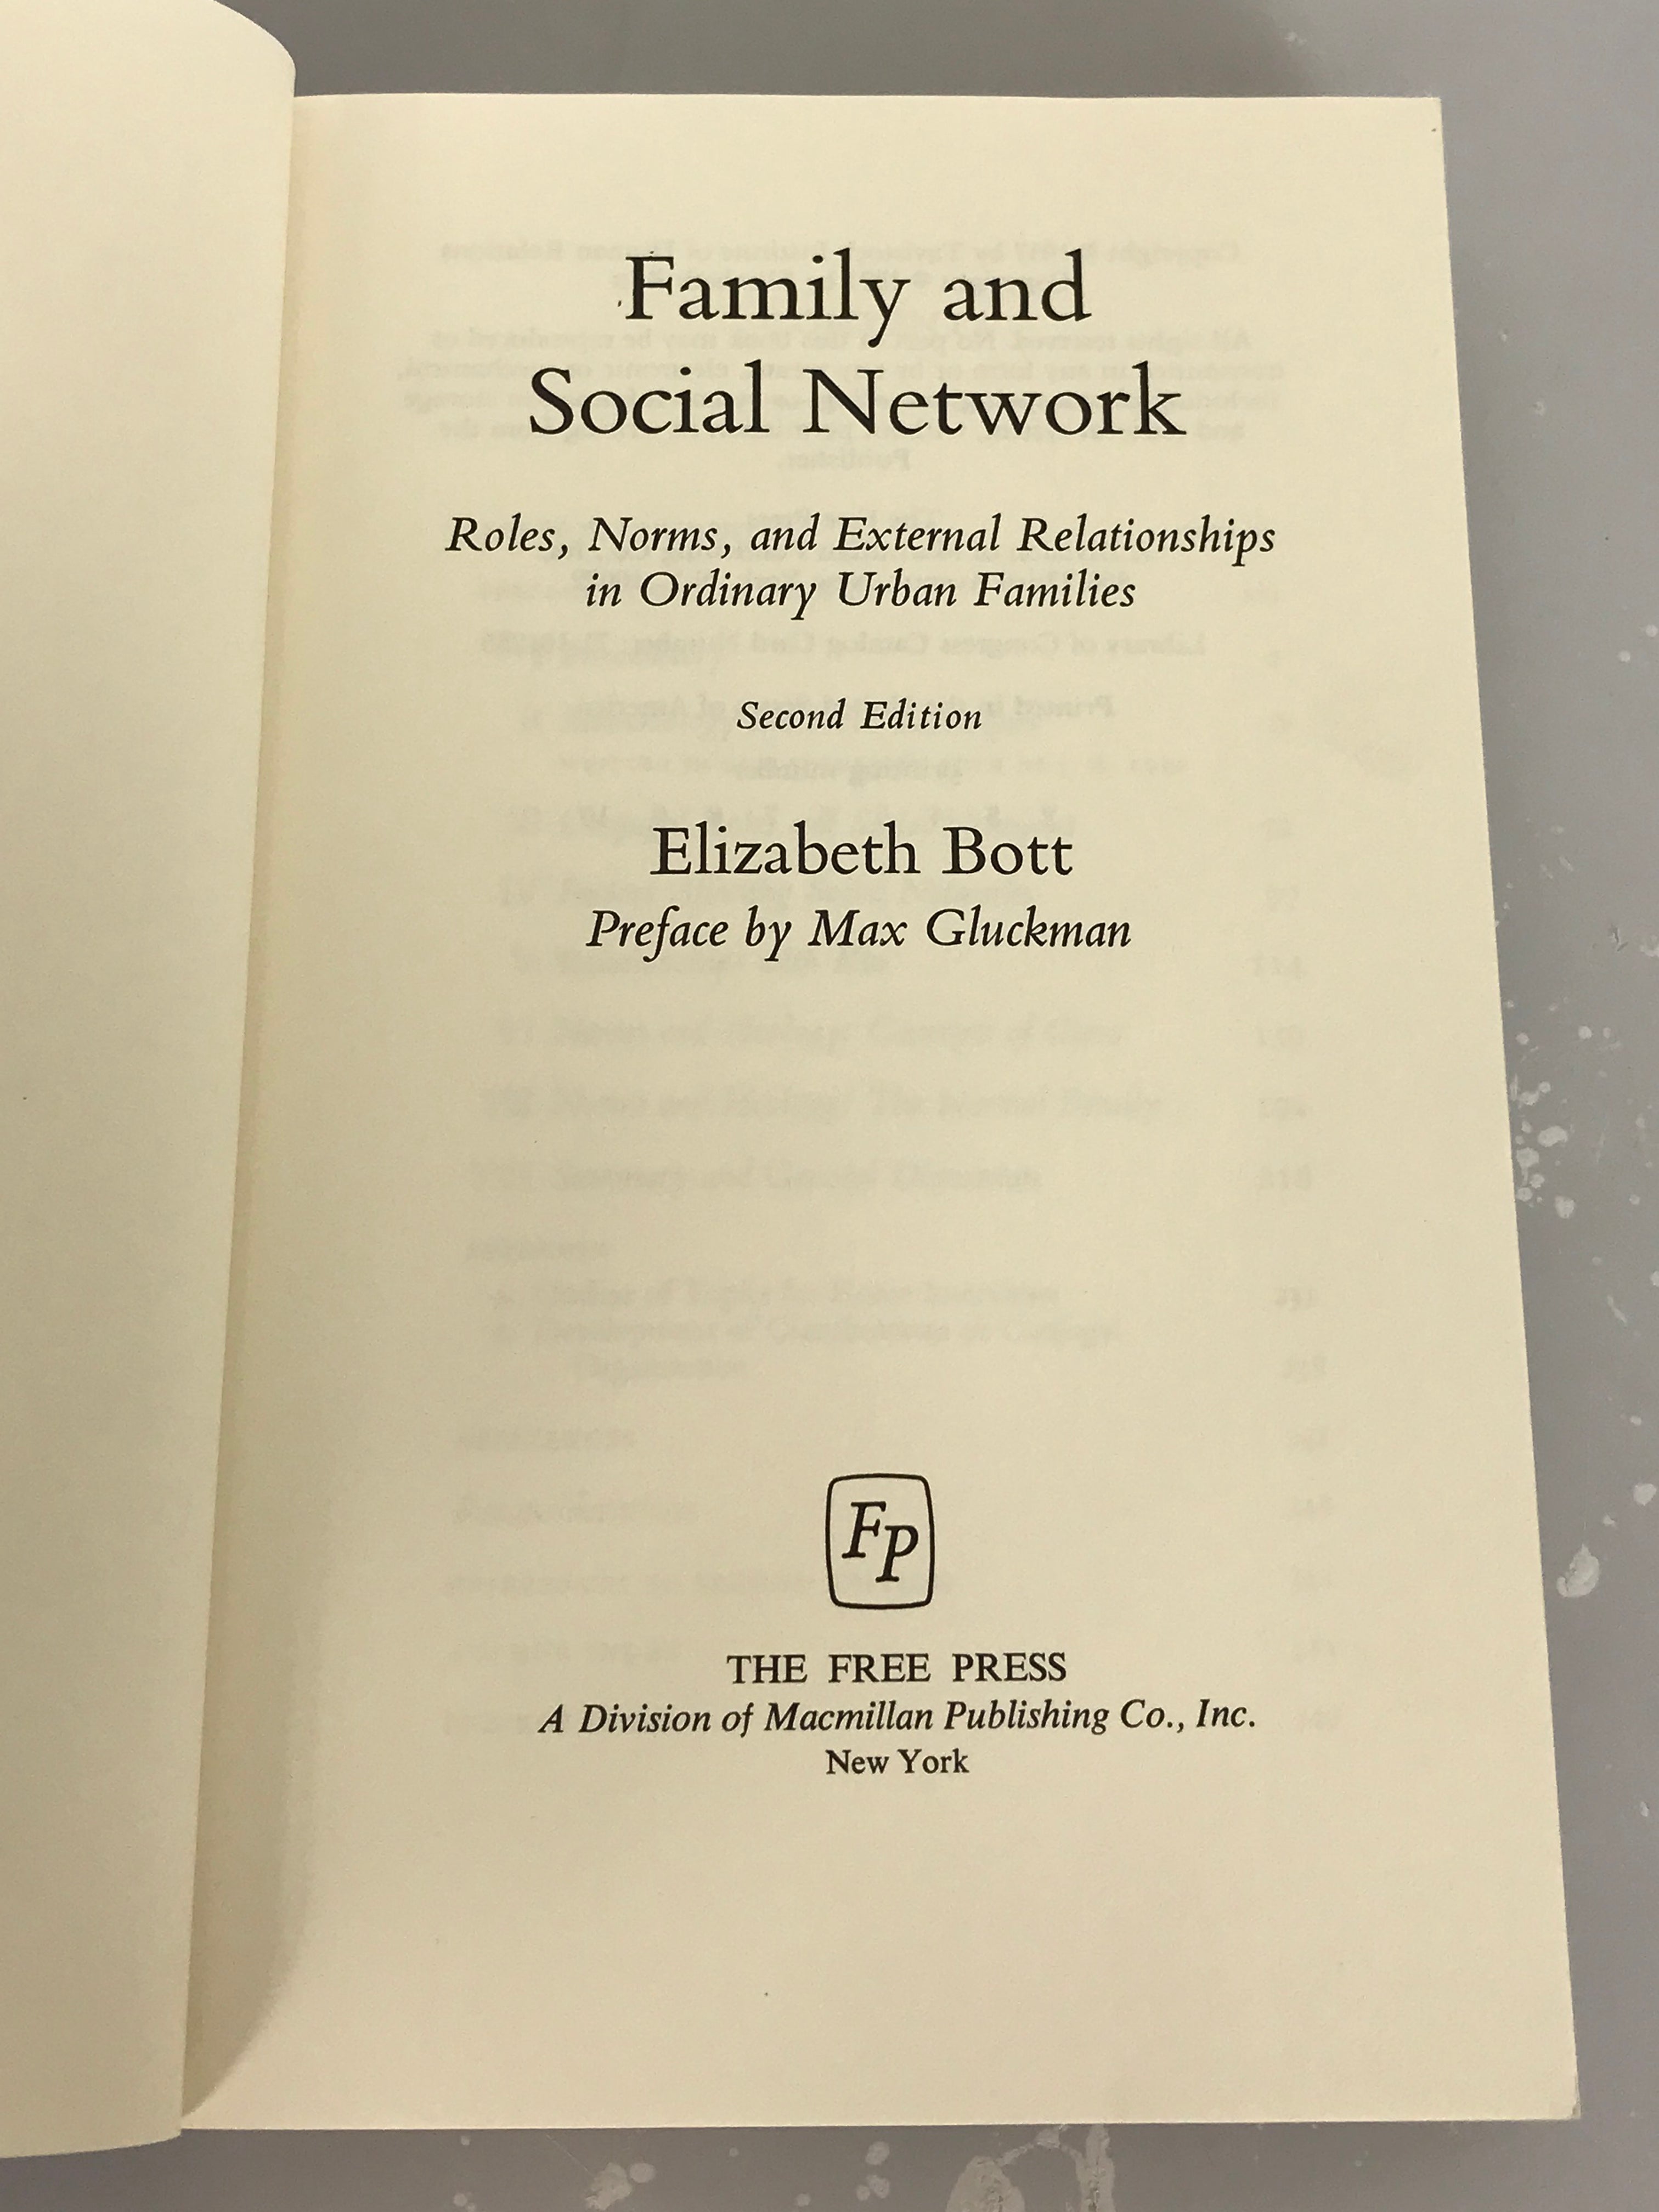 Family and Social Network by Elizabeth Bott Second Edition 1971 SC